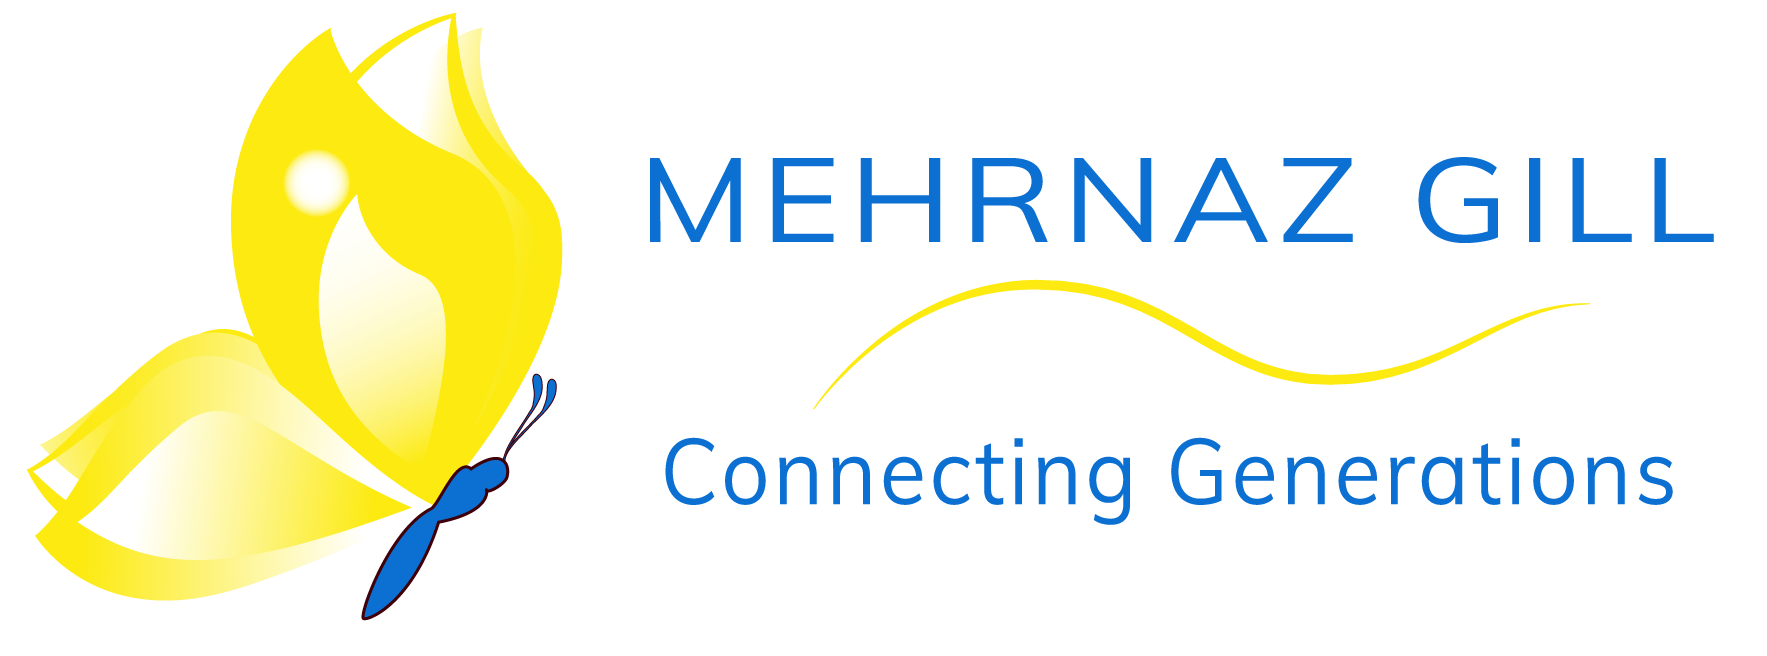 Welcome to the Website of Mehrnaz Gill